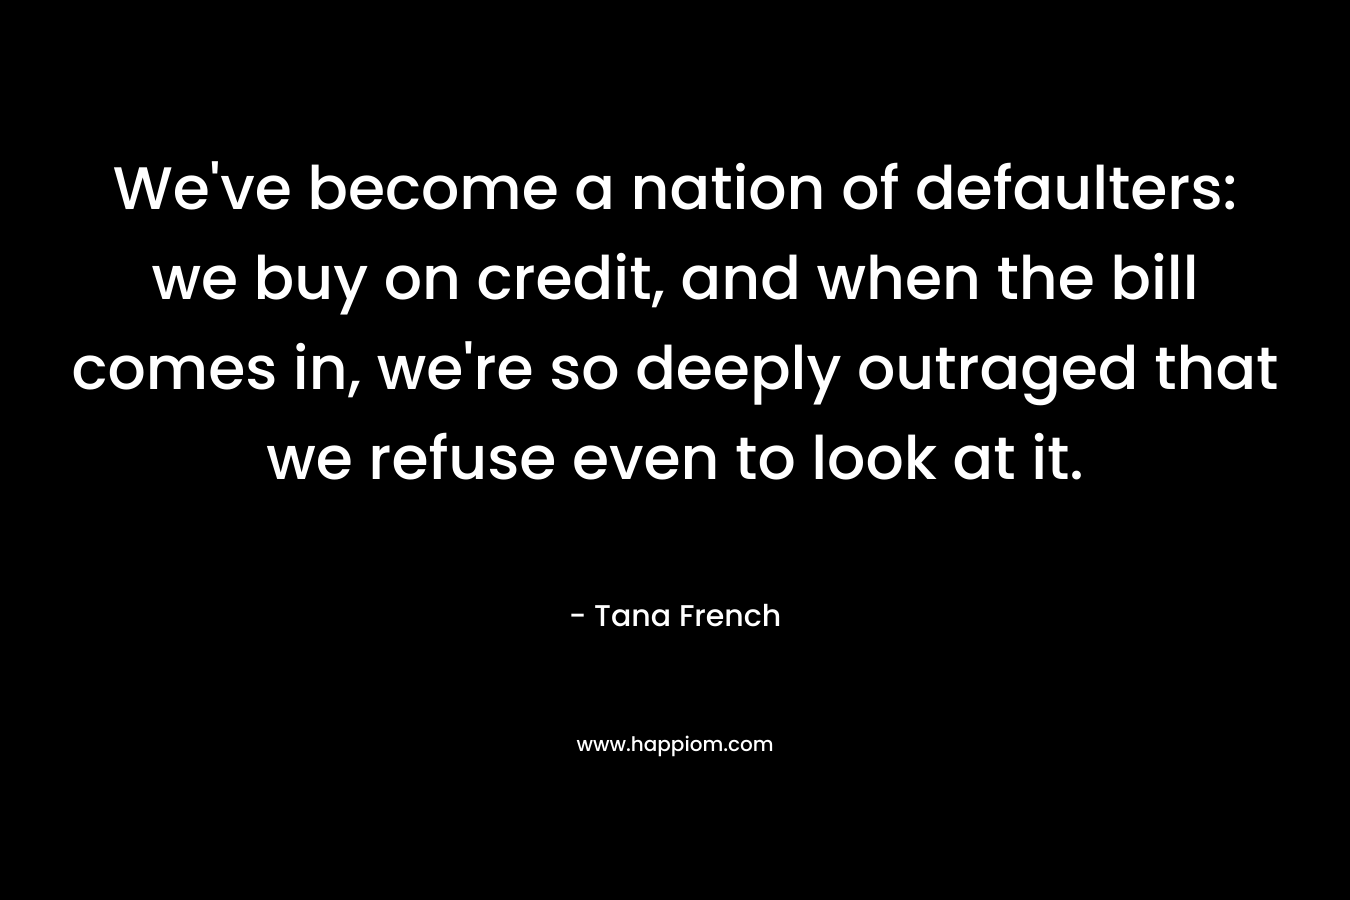 We've become a nation of defaulters: we buy on credit, and when the bill comes in, we're so deeply outraged that we refuse even to look at it.